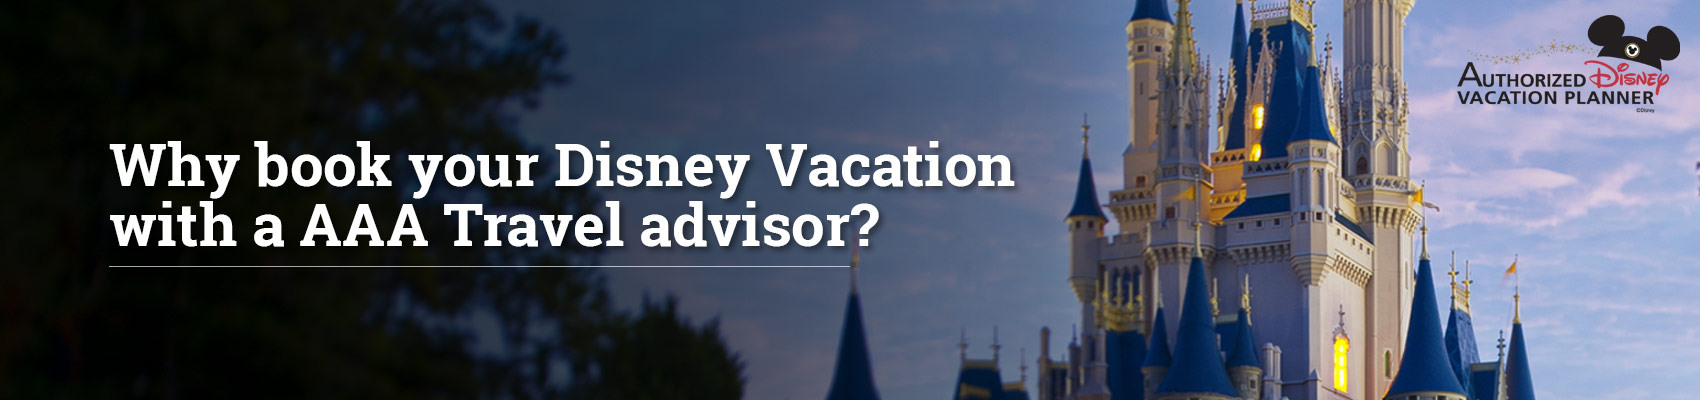 Why book your Disney Vacation with a AAA travel advisor? 